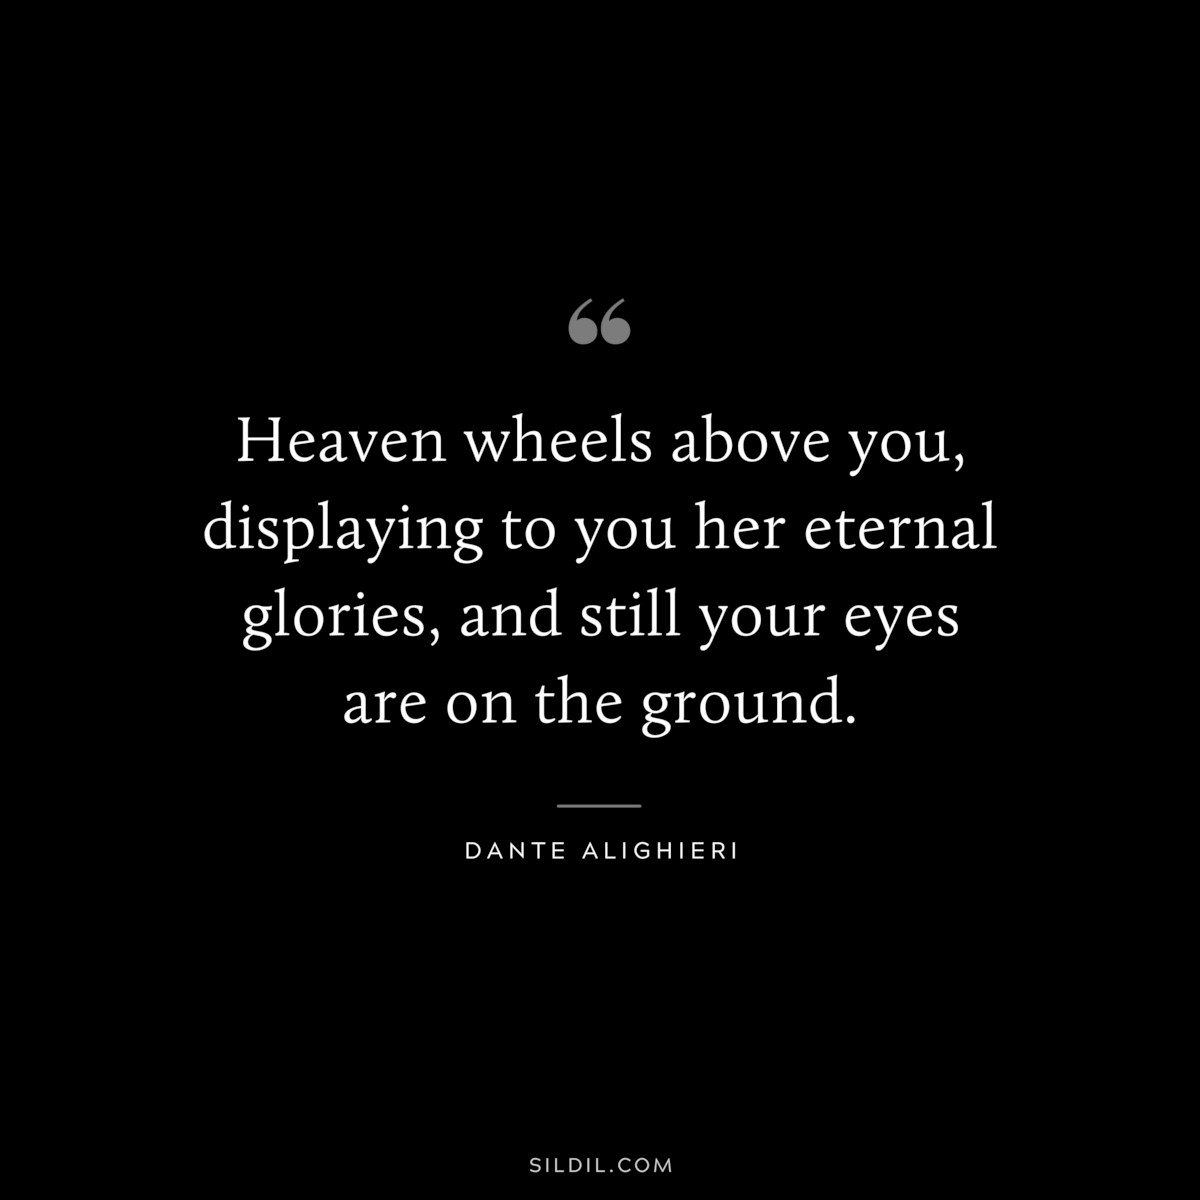 Heaven wheels above you, displaying to you her eternal glories, and still your eyes are on the ground. ― Dante Alighieri